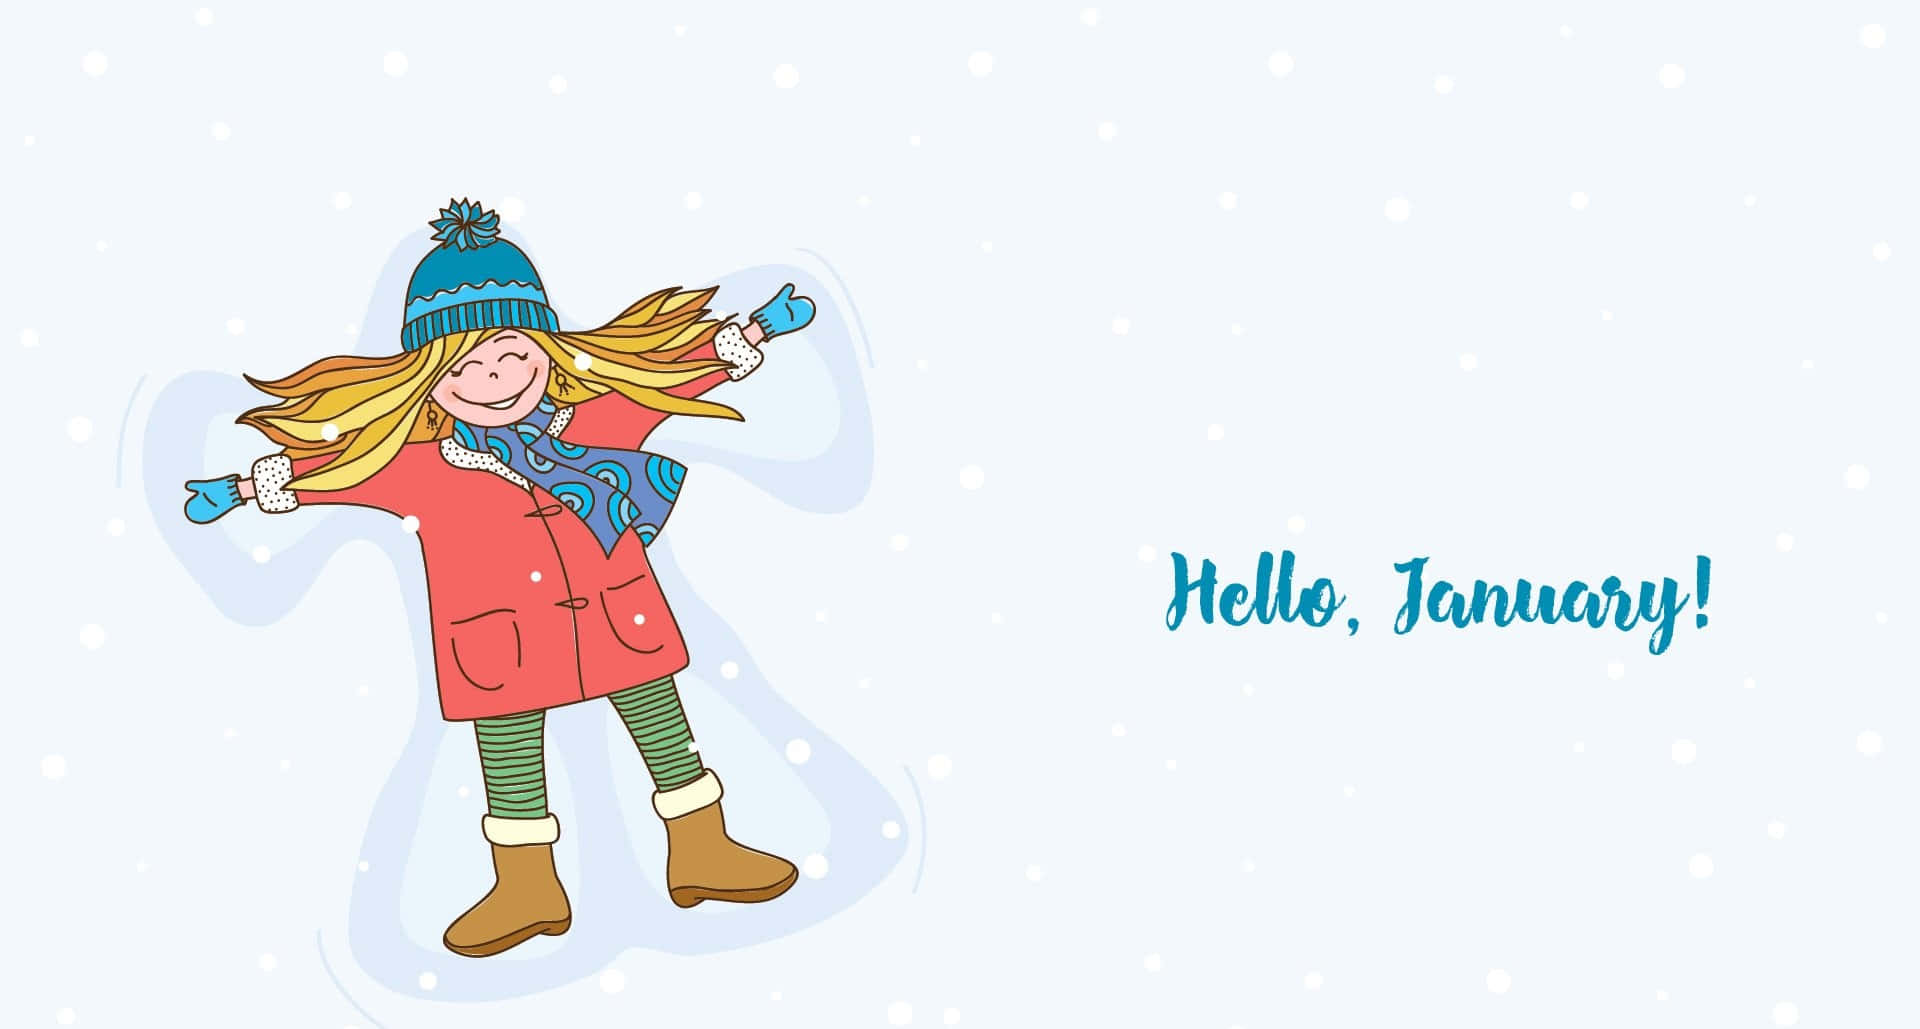 Welcome Winter with the Blissful Snow of January